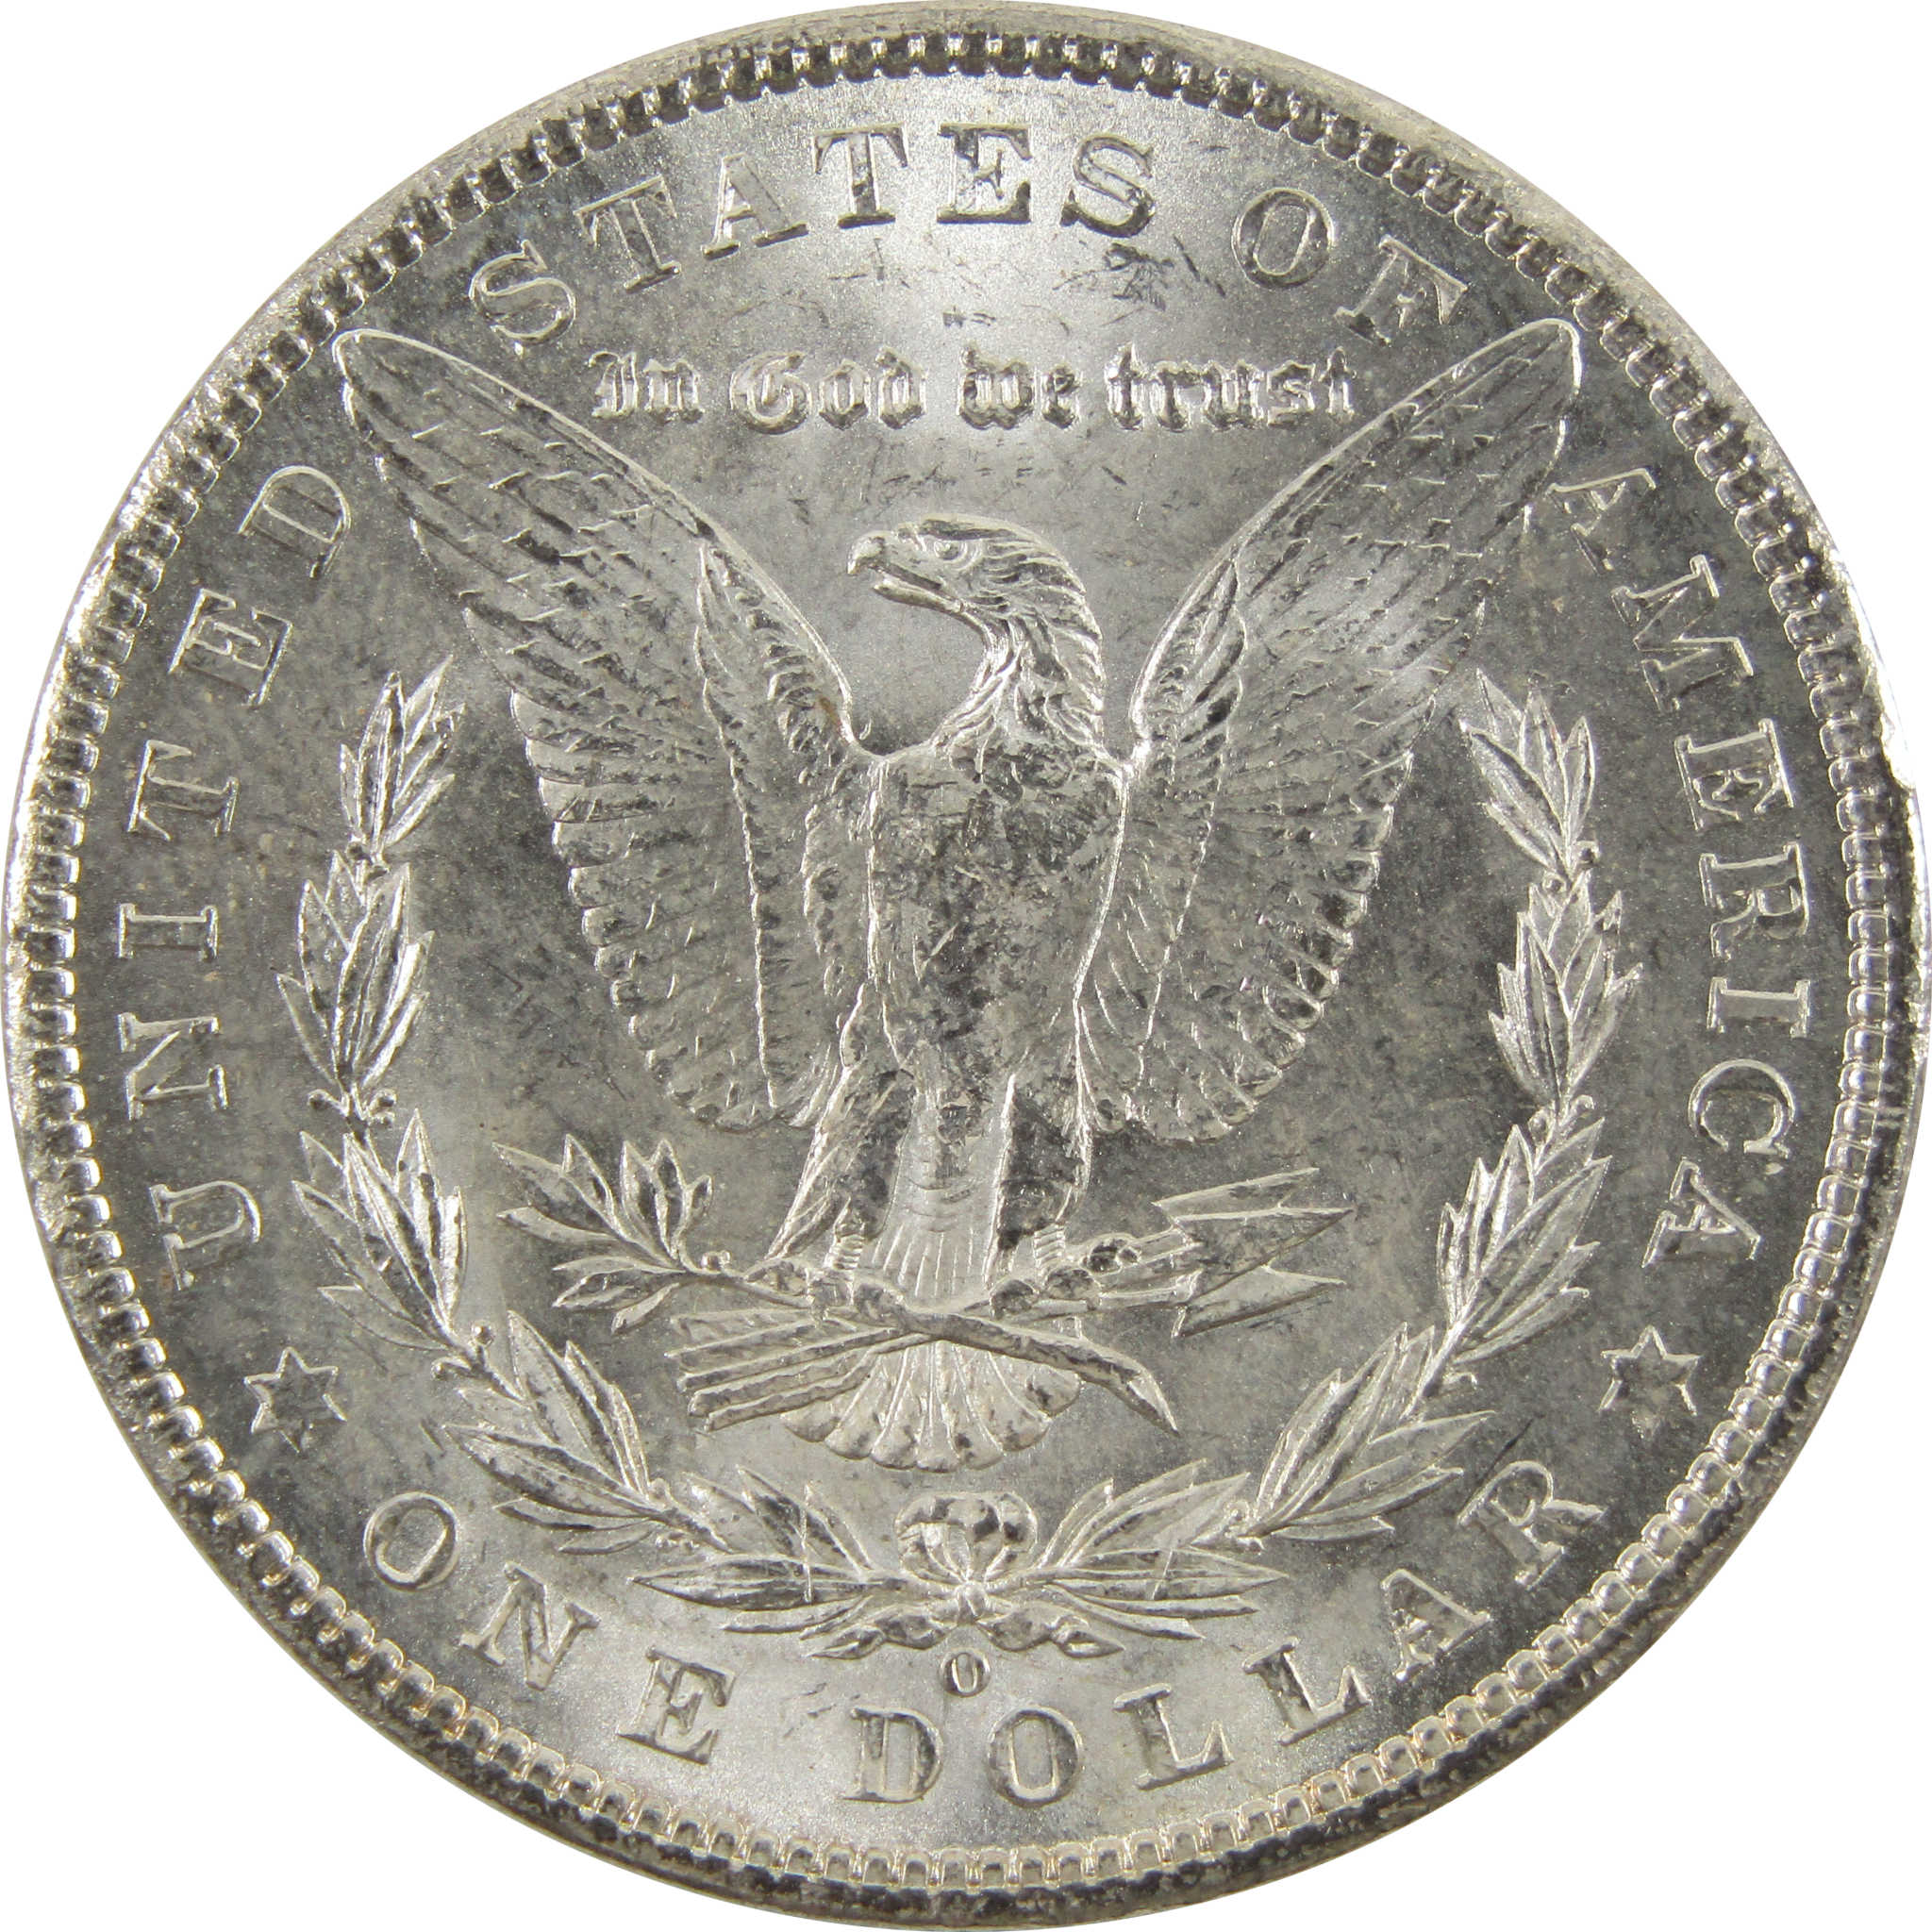 1901 O Morgan Dollar Uncirculated Details 90% Silver $1 SKU:I10463 - Morgan coin - Morgan silver dollar - Morgan silver dollar for sale - Profile Coins &amp; Collectibles